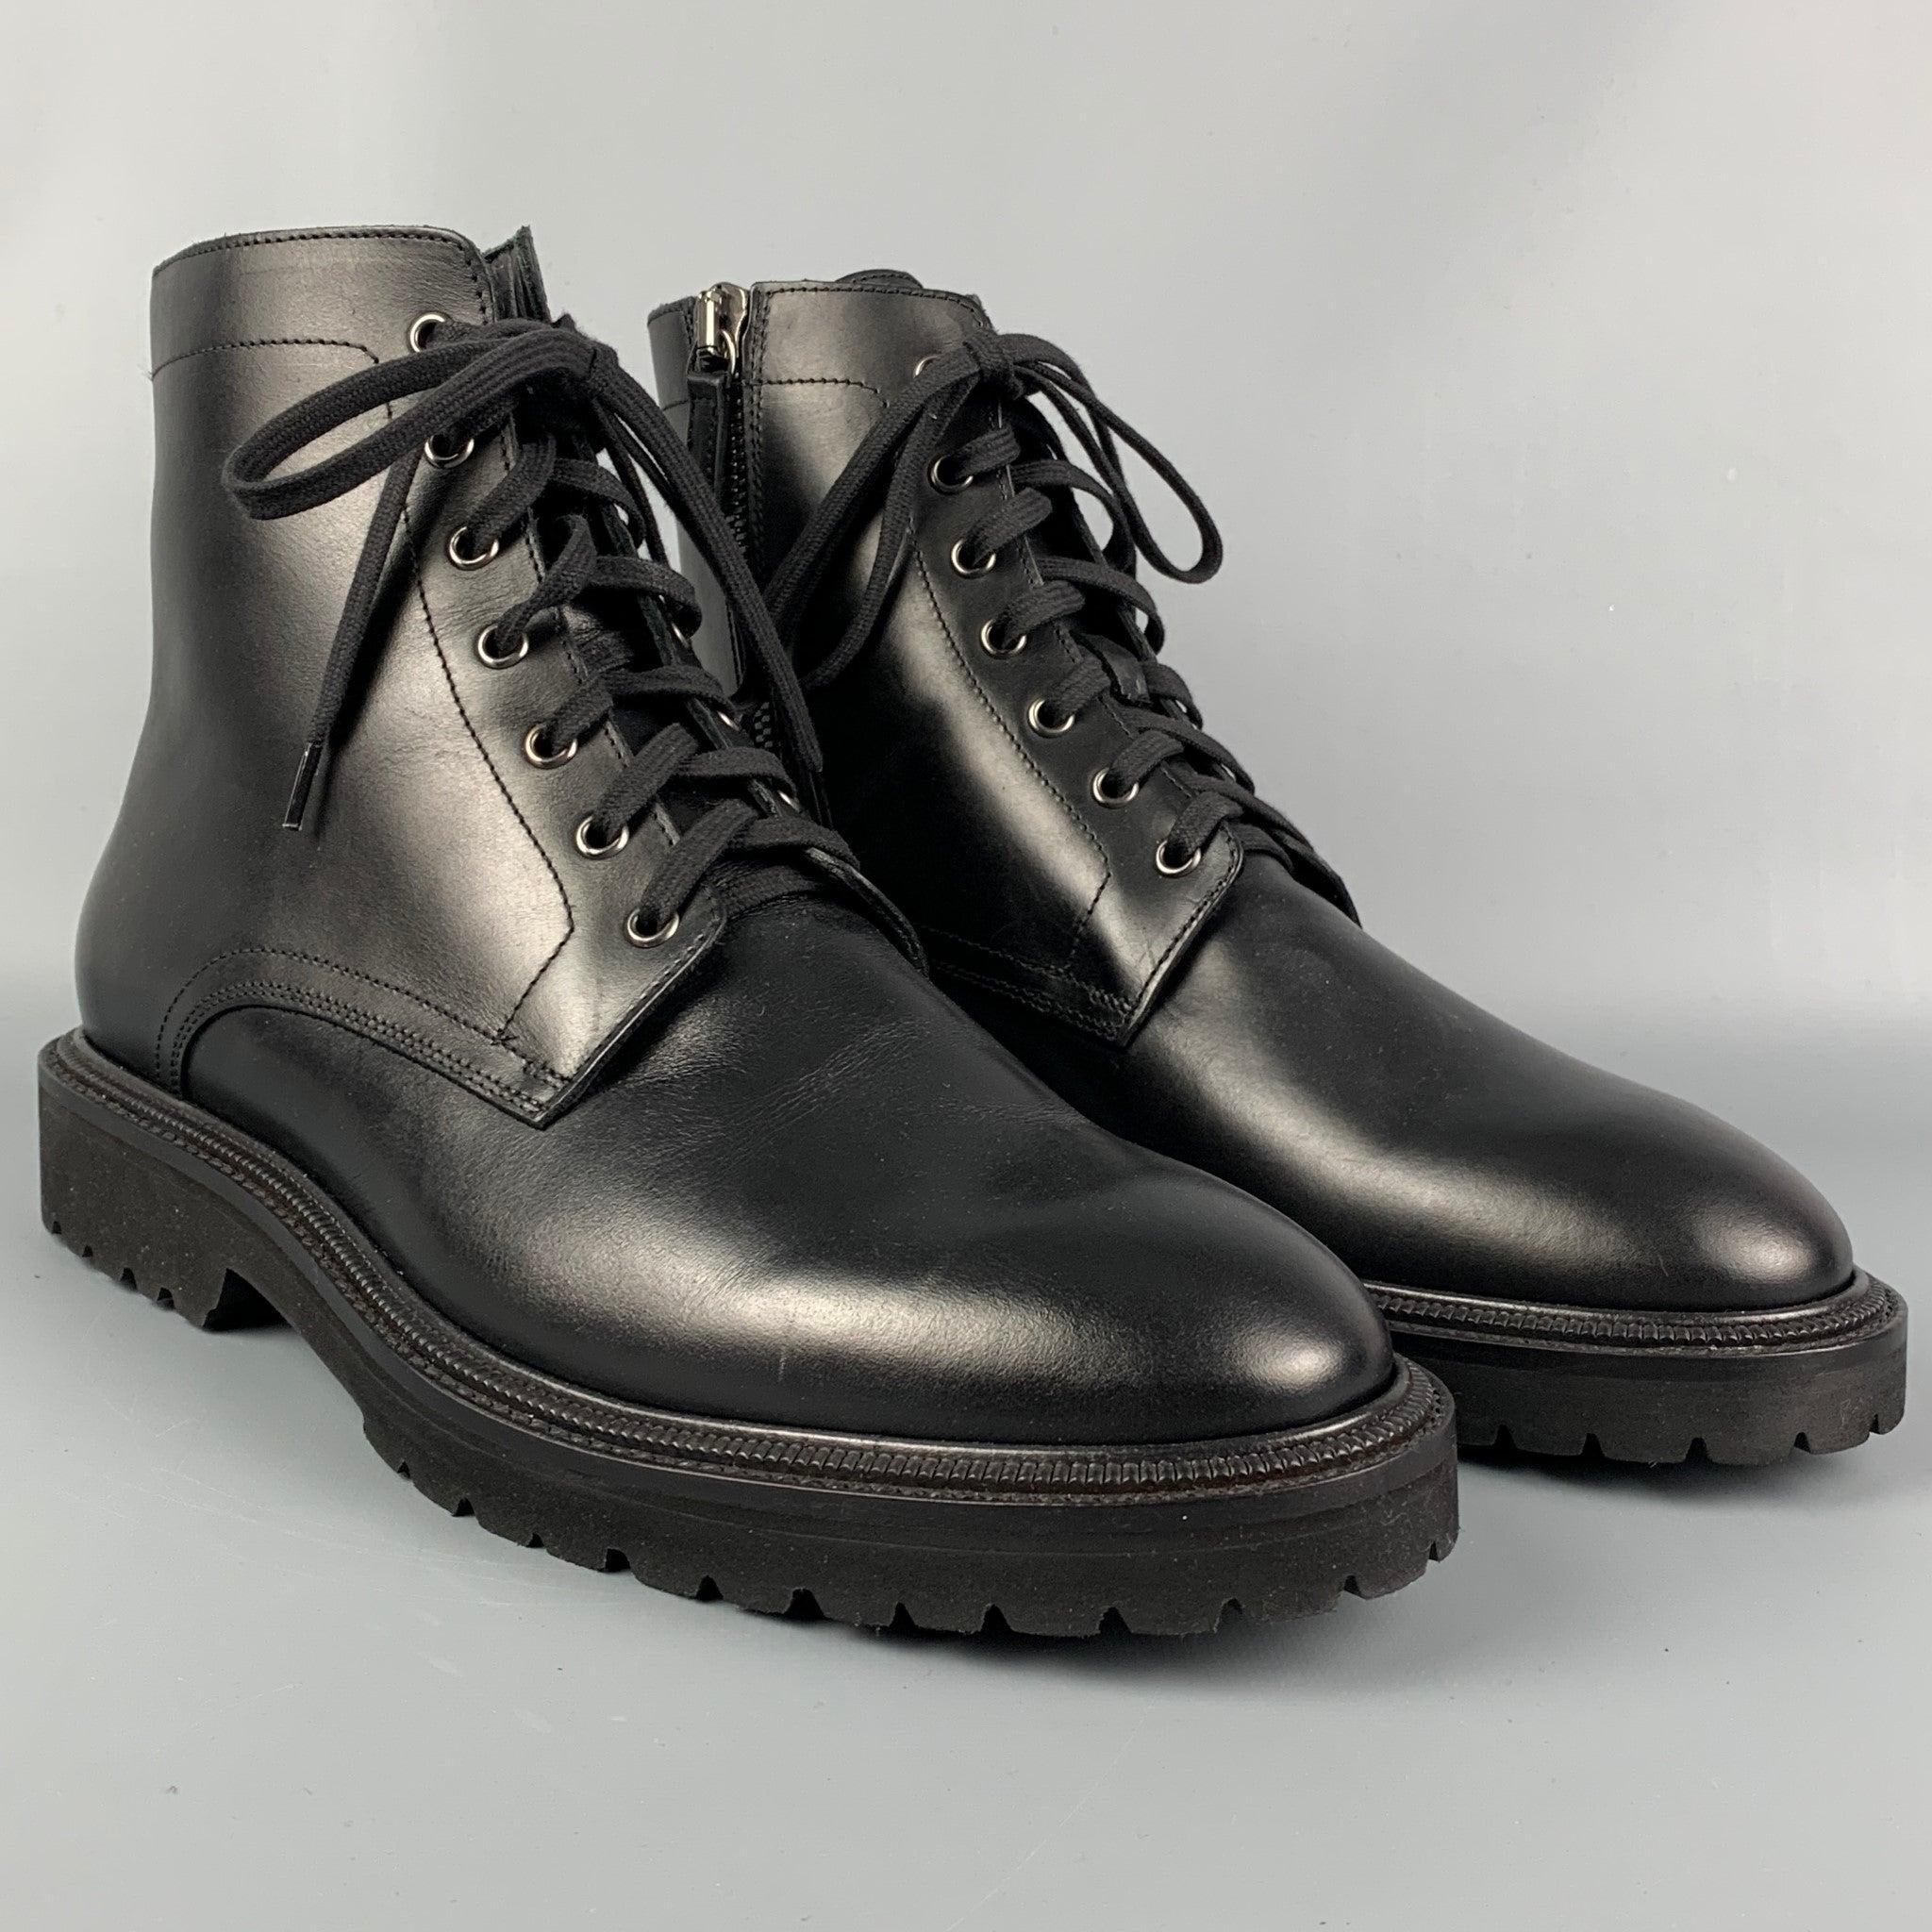 AQUATALIA ankle boots comes in a black leather featuring a rubber sole and a side zipper closure. Made in Italy.
New Without Tags.
 

Marked:  
11  

Measurements: 
  Length: 12.5 inches  Width: 4.5 inches  Height: 6 inches 
  
  
 
Reference: